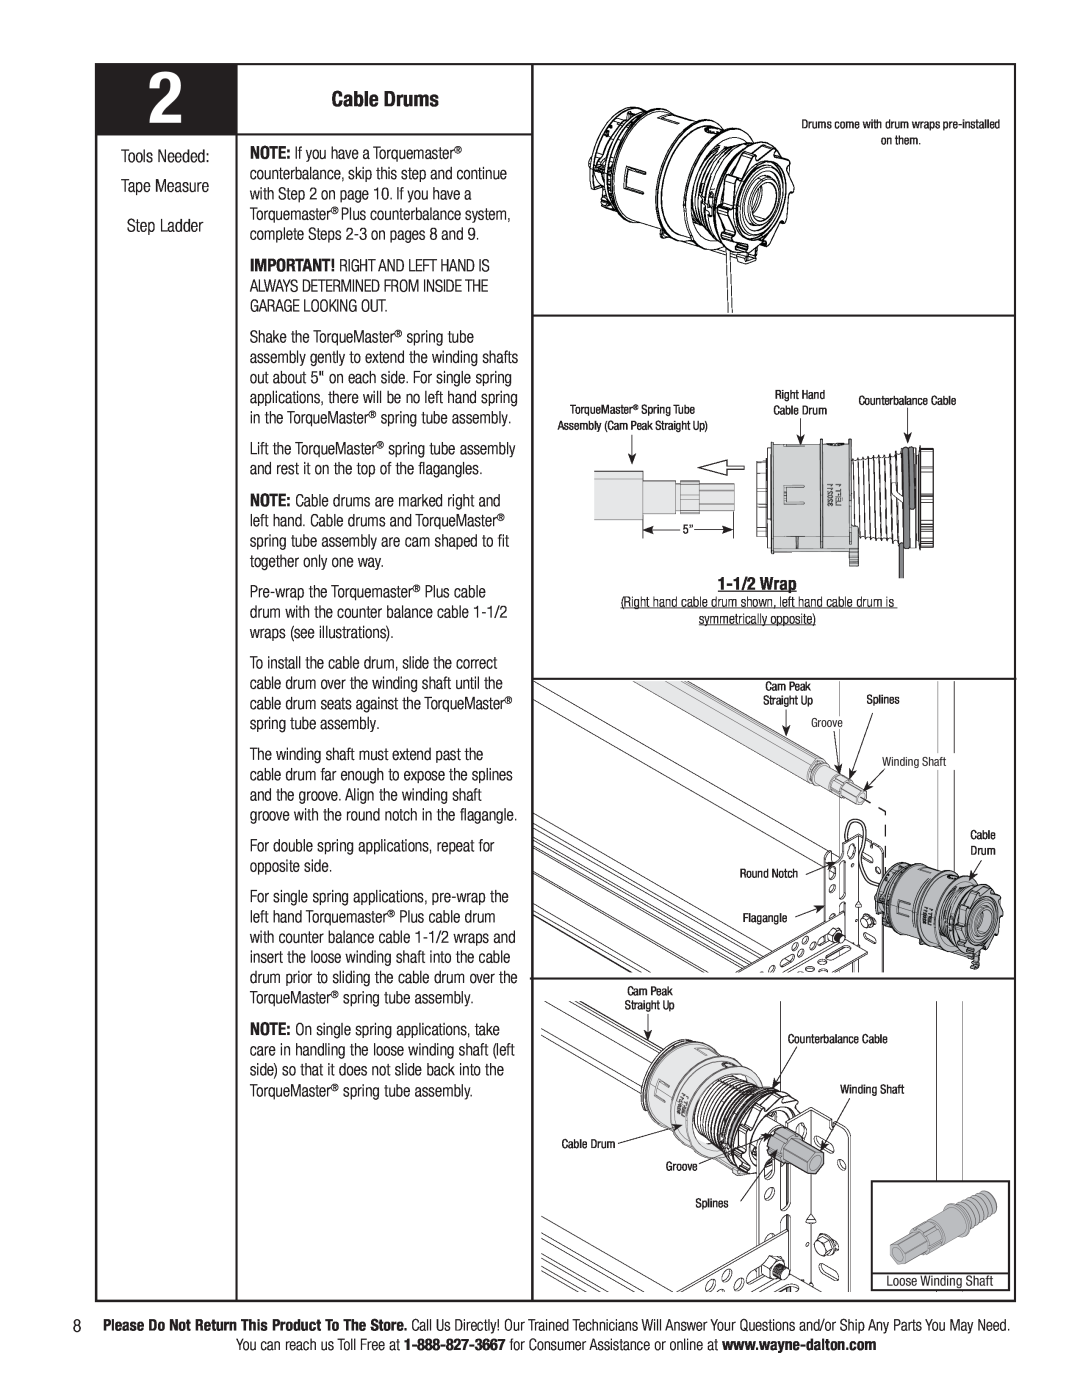 Wayne-Dalton 3790 Cable Drums, NOTE: If you have a Torquemaster, with on page 10. If you have a, Garage Looking Out 